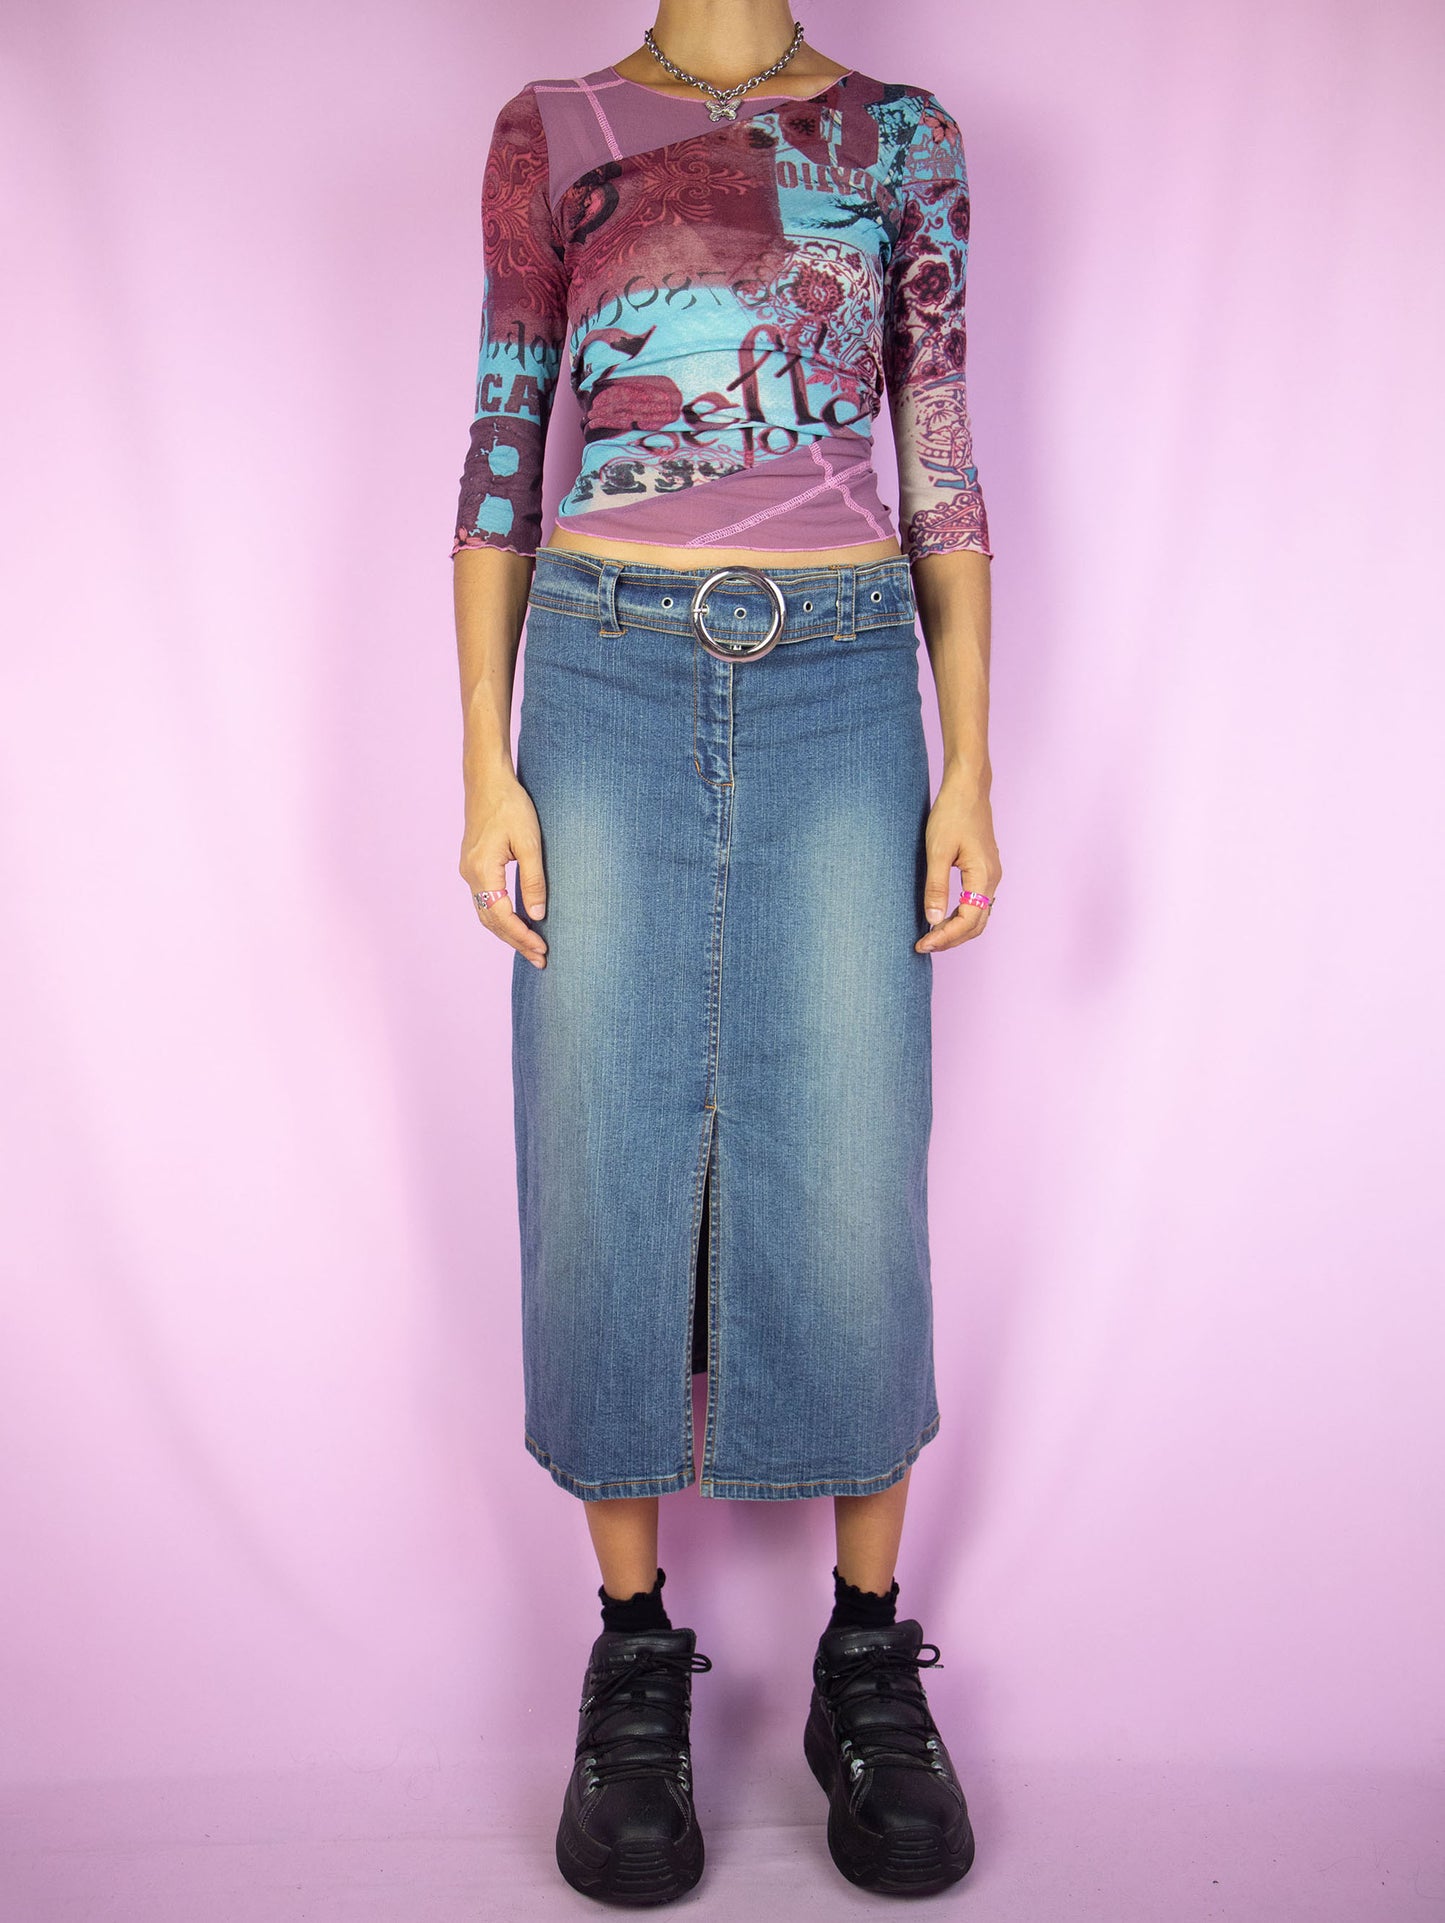 The Y2K Slit Denim Midi Skirt is a vintage stretch denim skirt with a front slit, belt buckle and zipper closure. Cyber grunge 2000s jean maxi skirt.